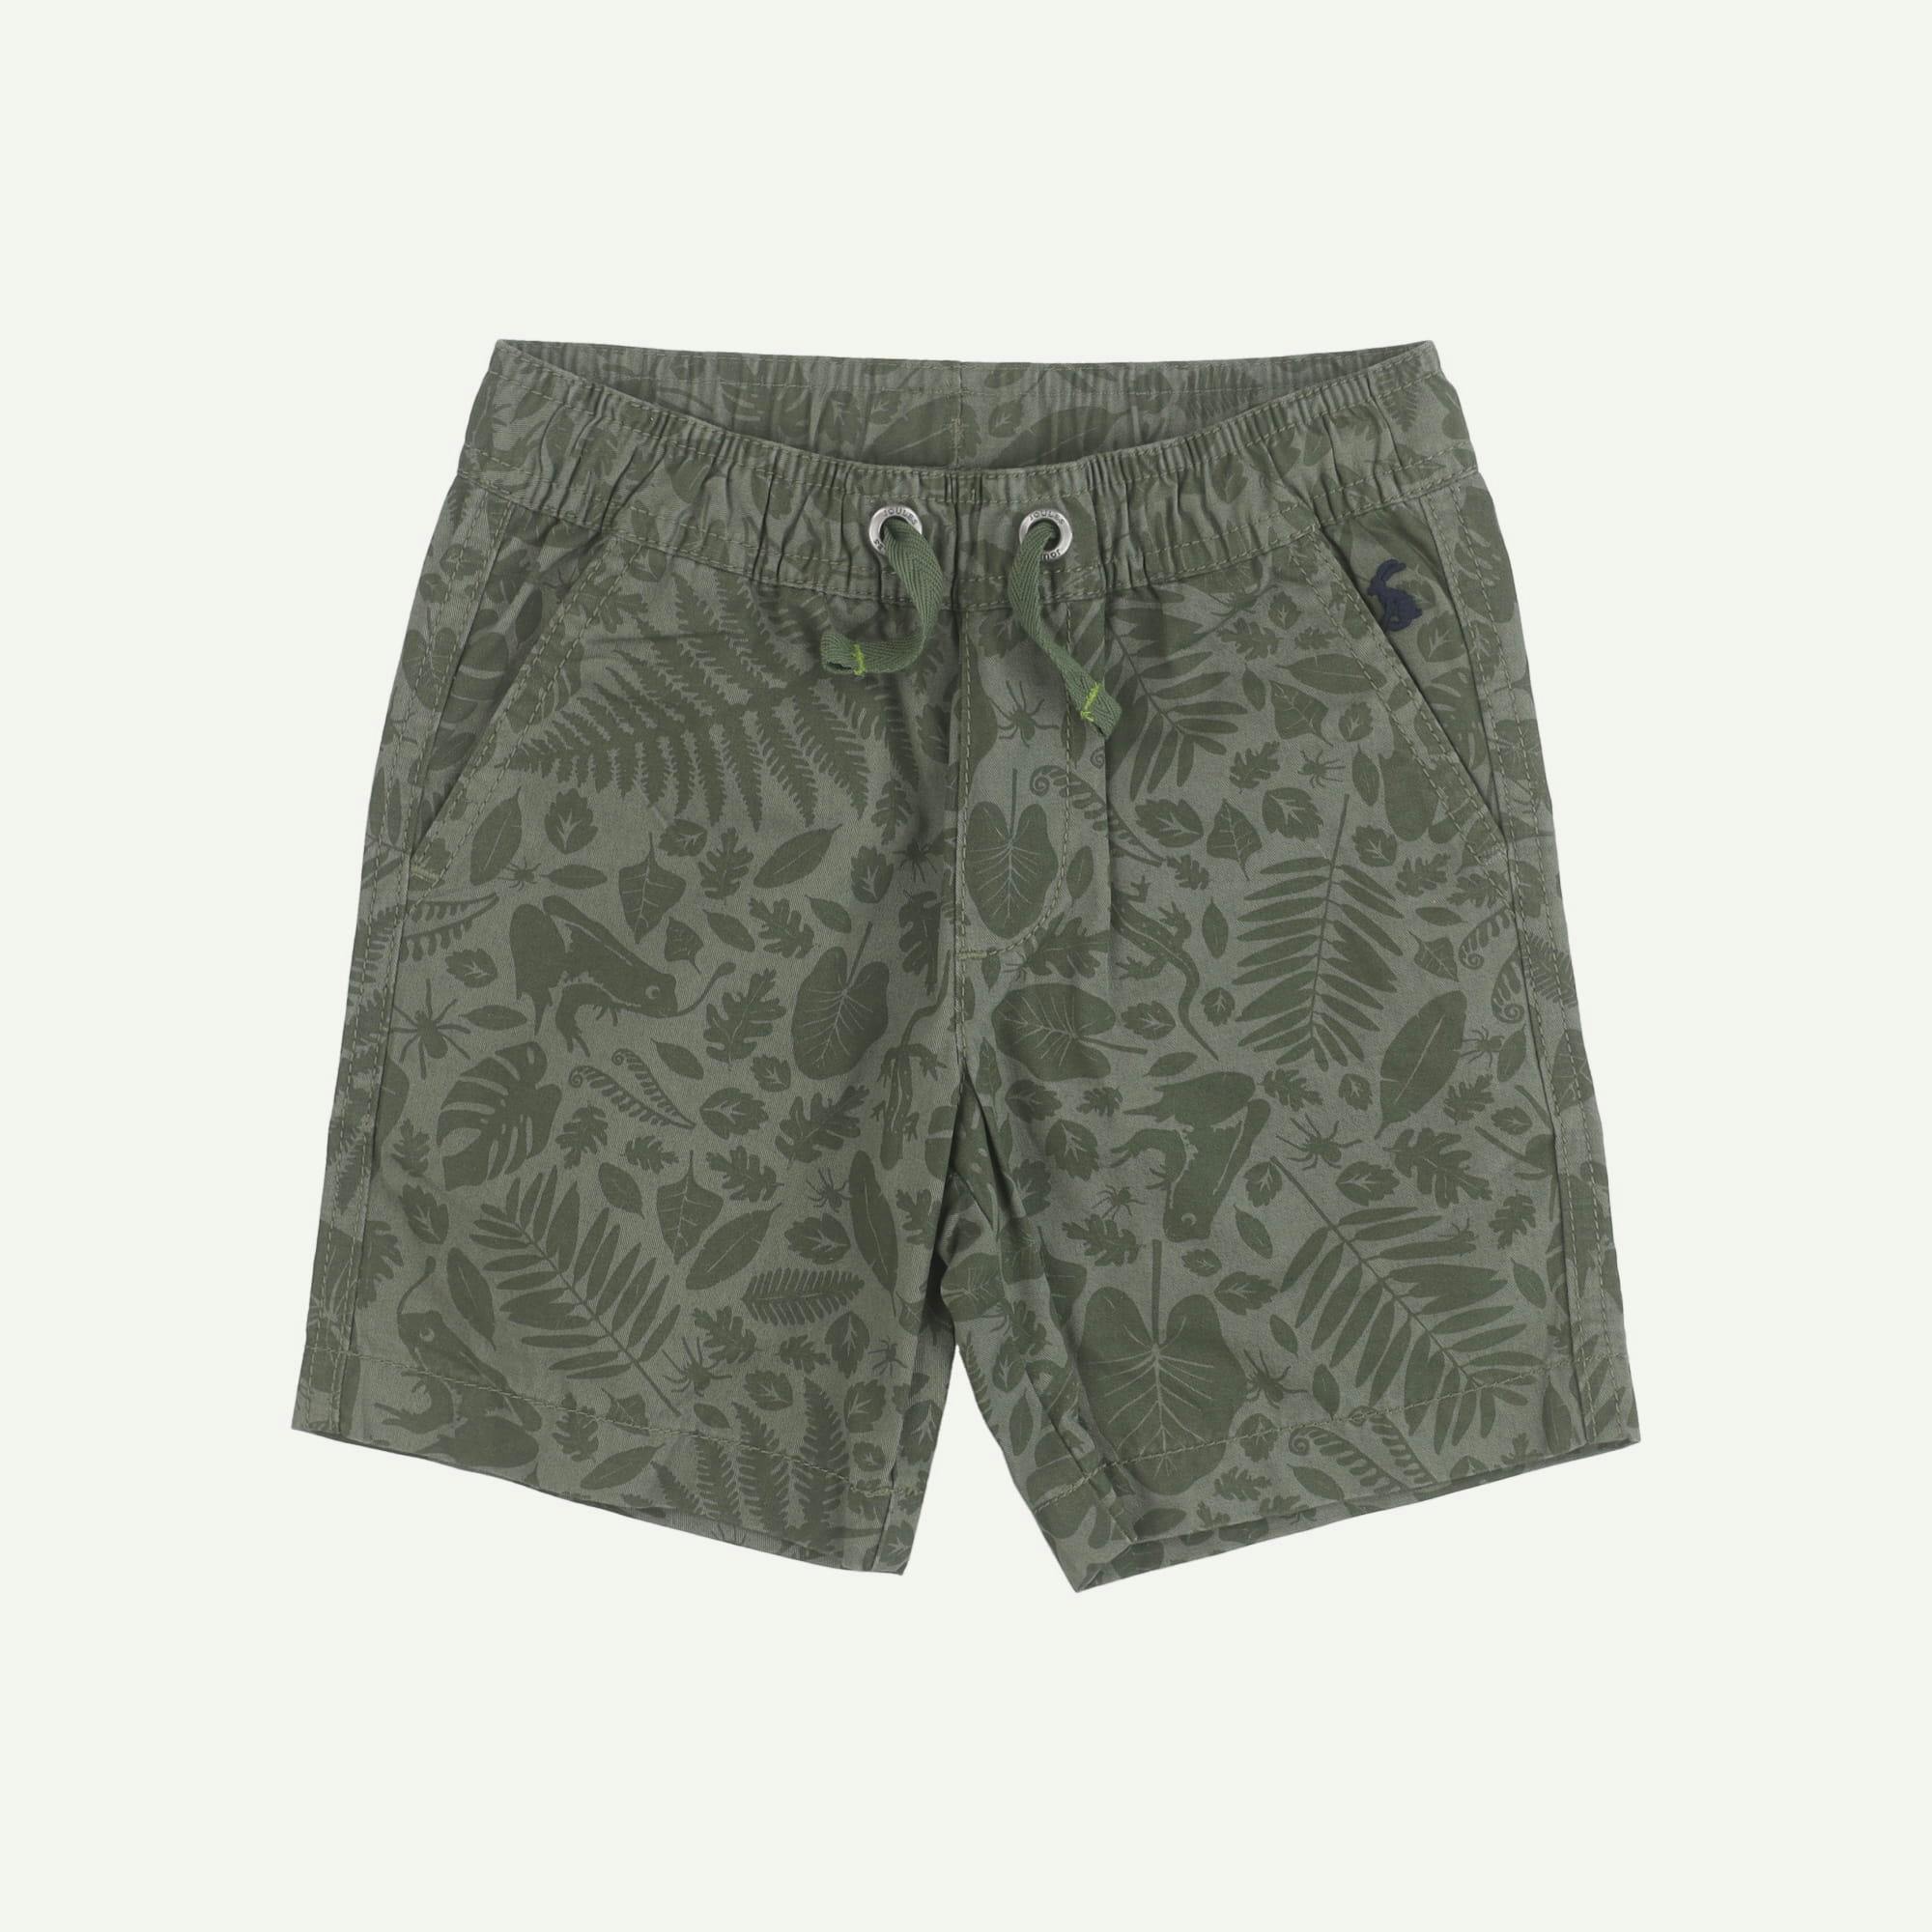 Joules As new Green Shorts